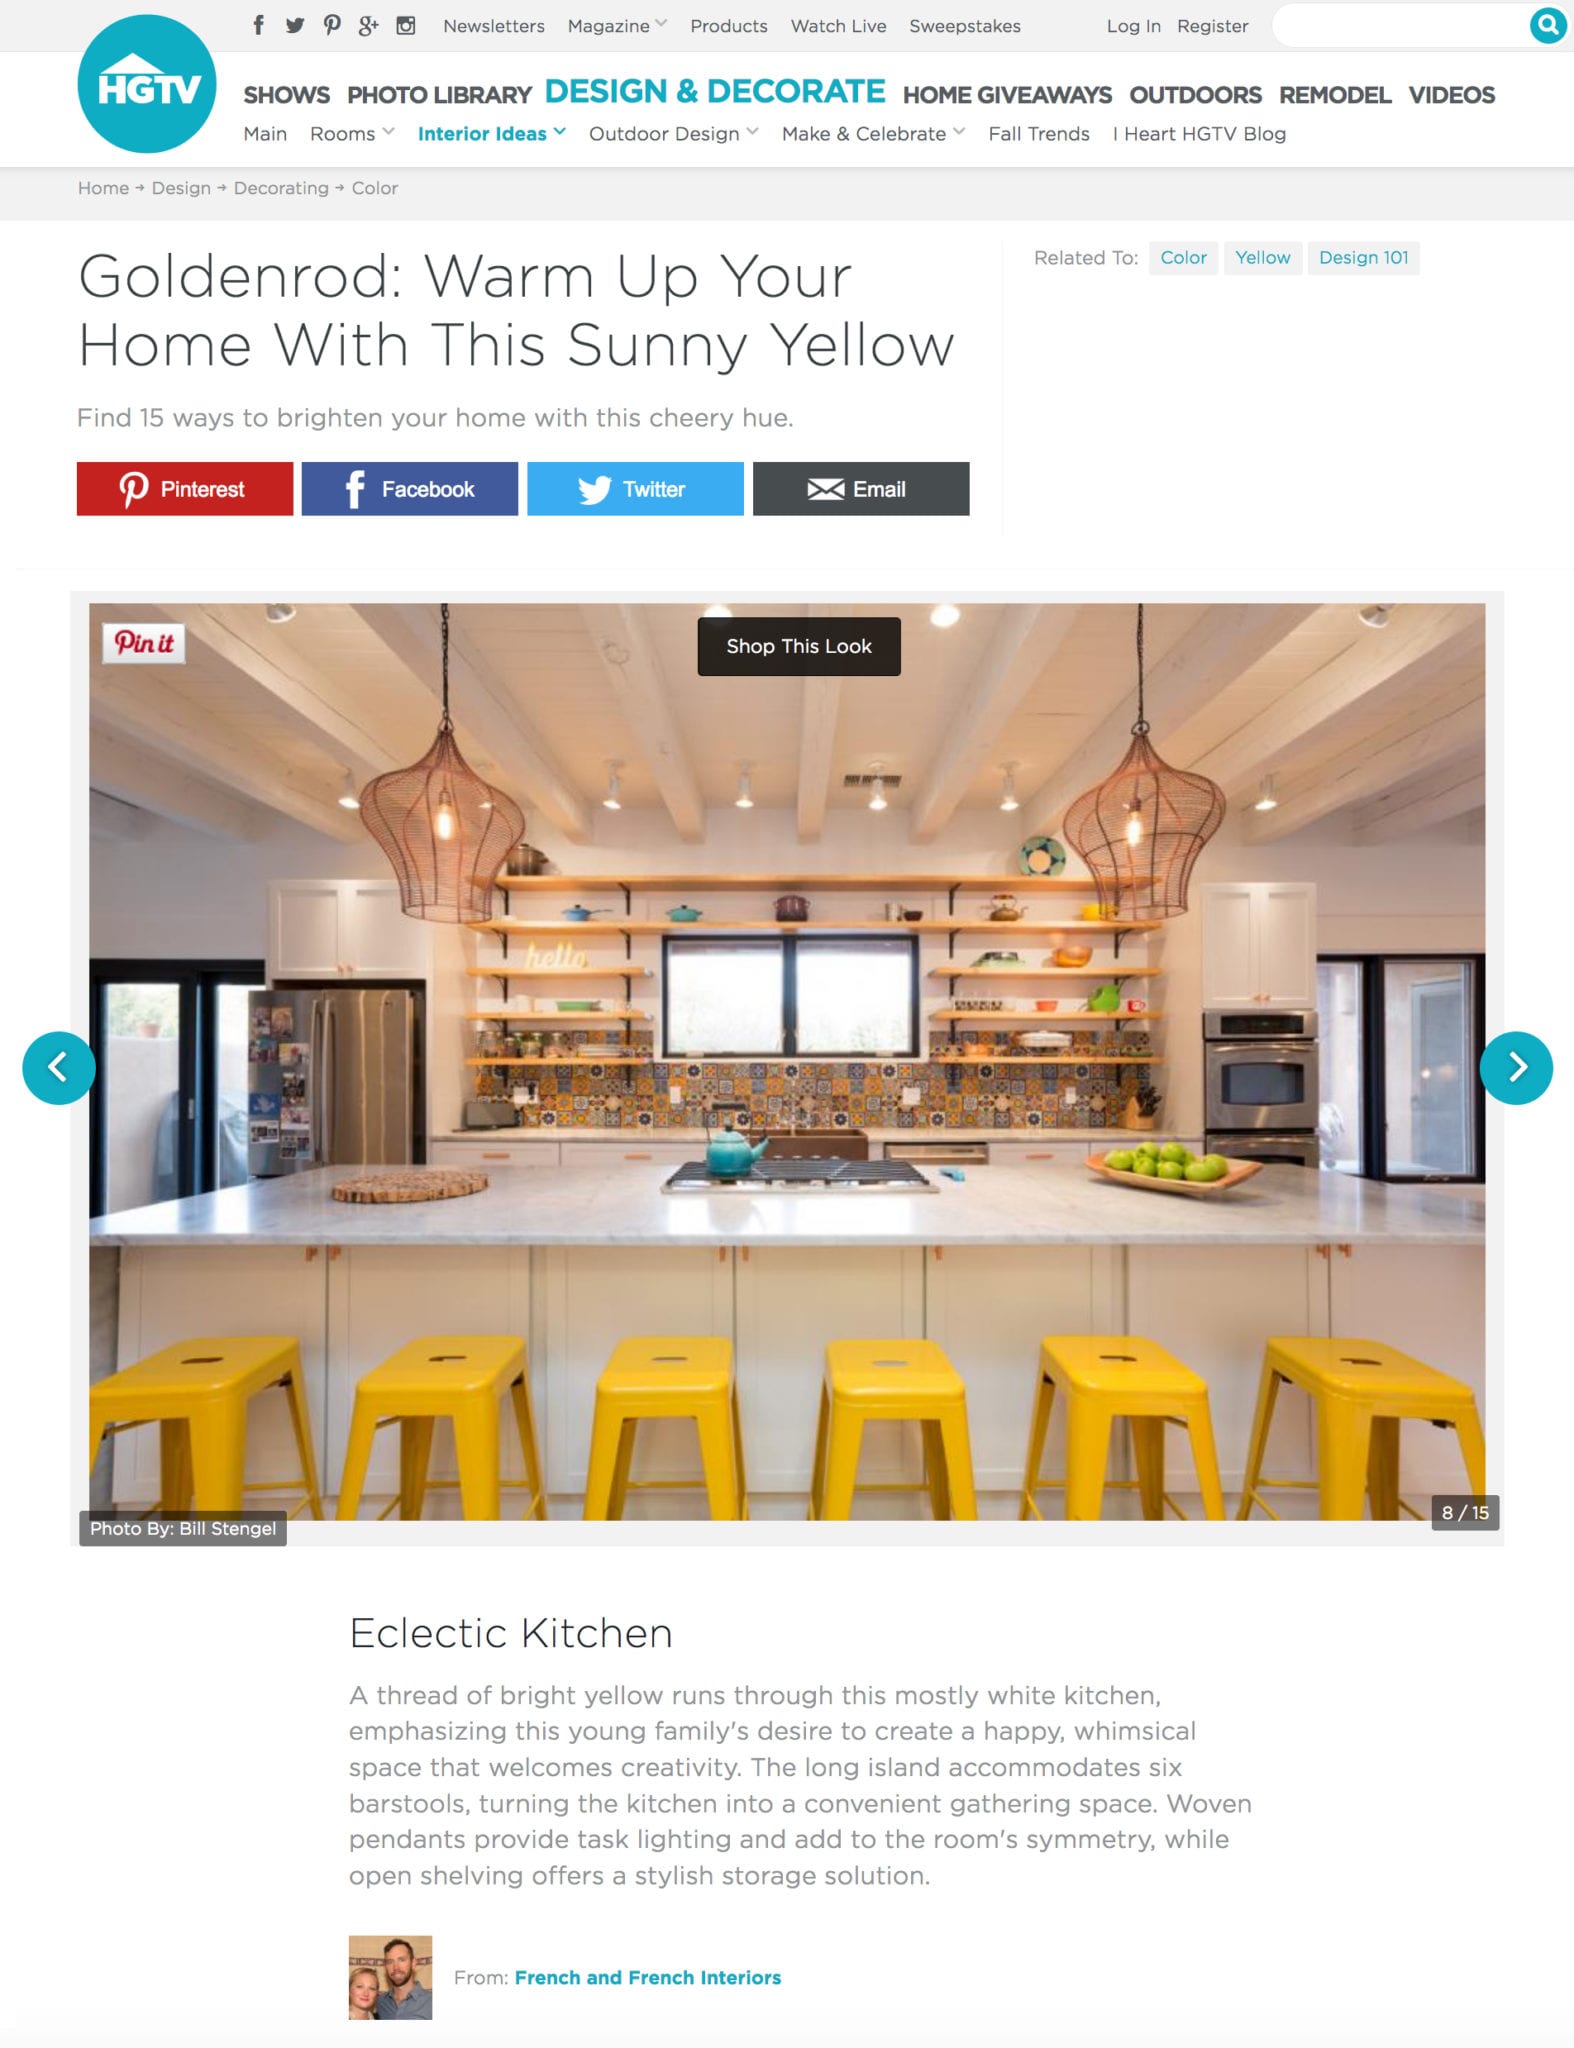 Goldenrod hgtv magazine golden rod article featuring french and french interiors